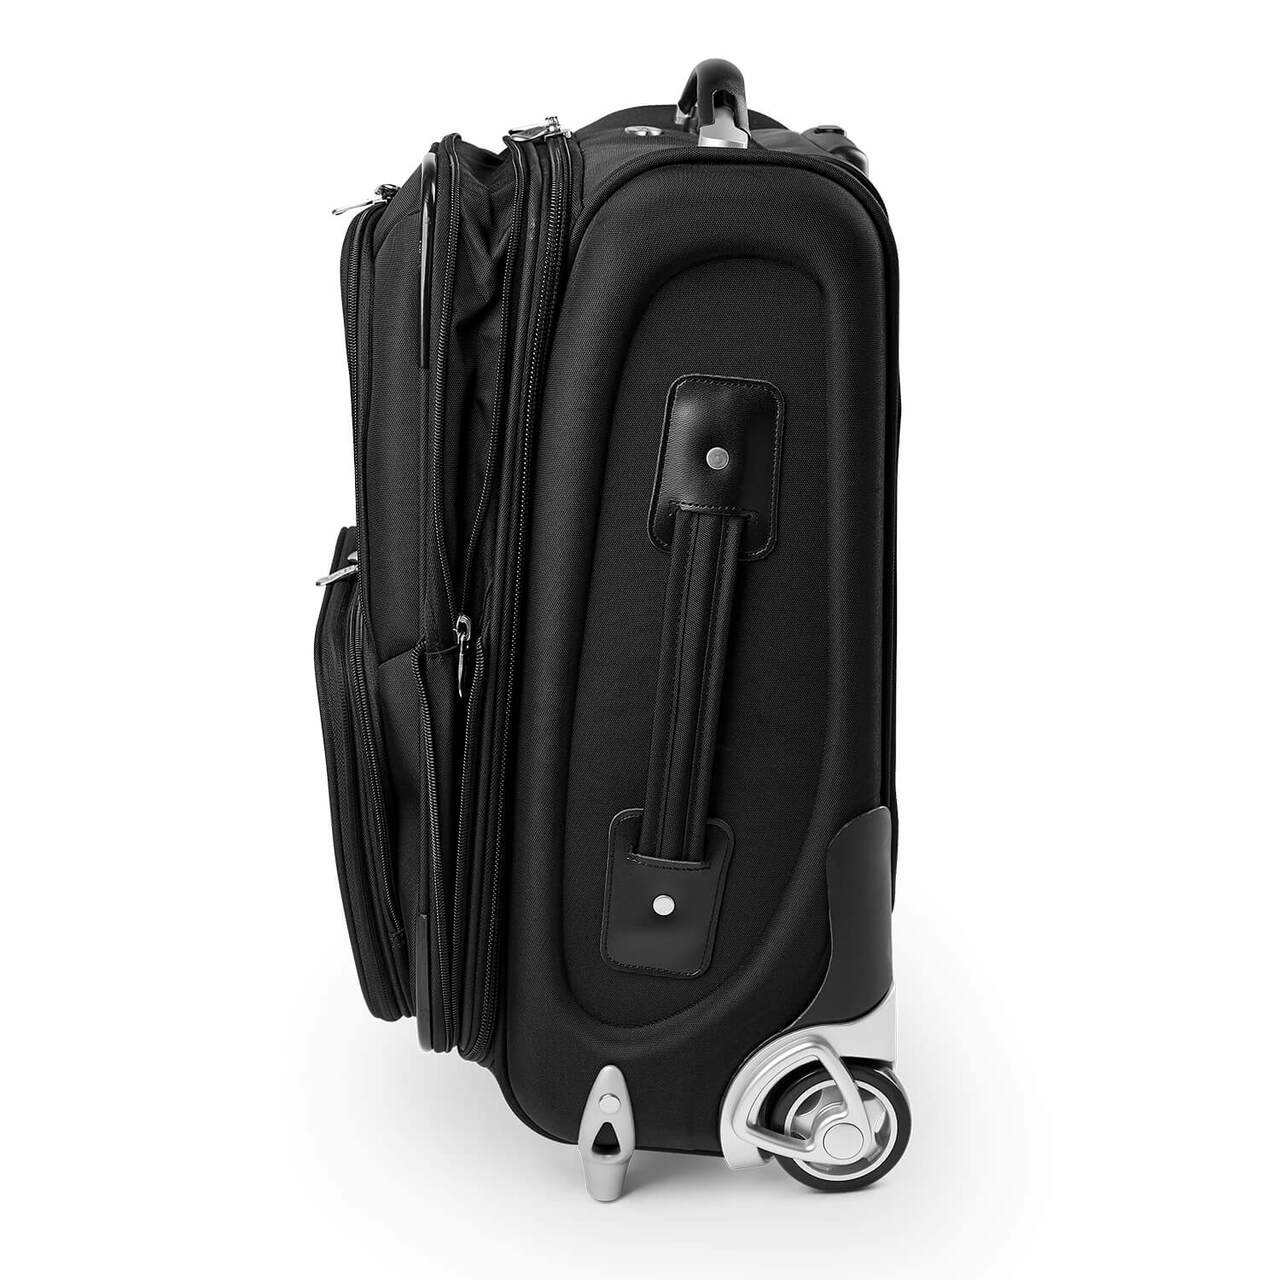 Eagles Carry On Luggage | Philadelphia Eagles Rolling Carry On Luggage